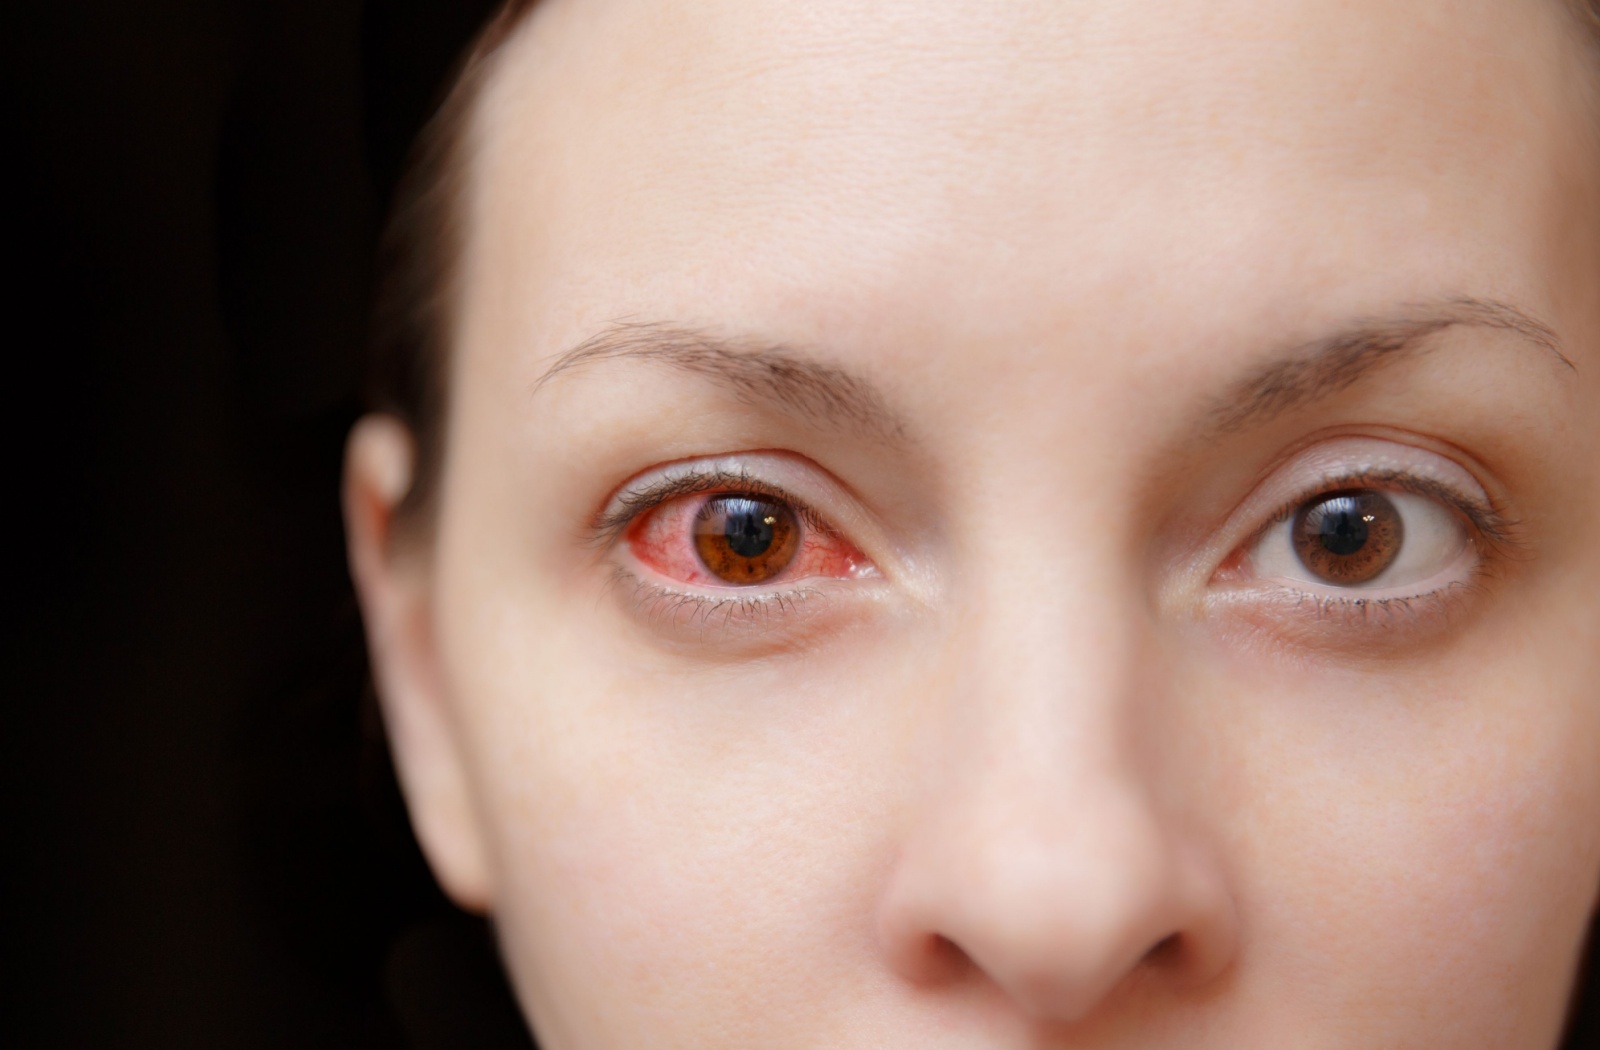 A woman looks at the camera, one of her eyes is red and inflamed with pink eye